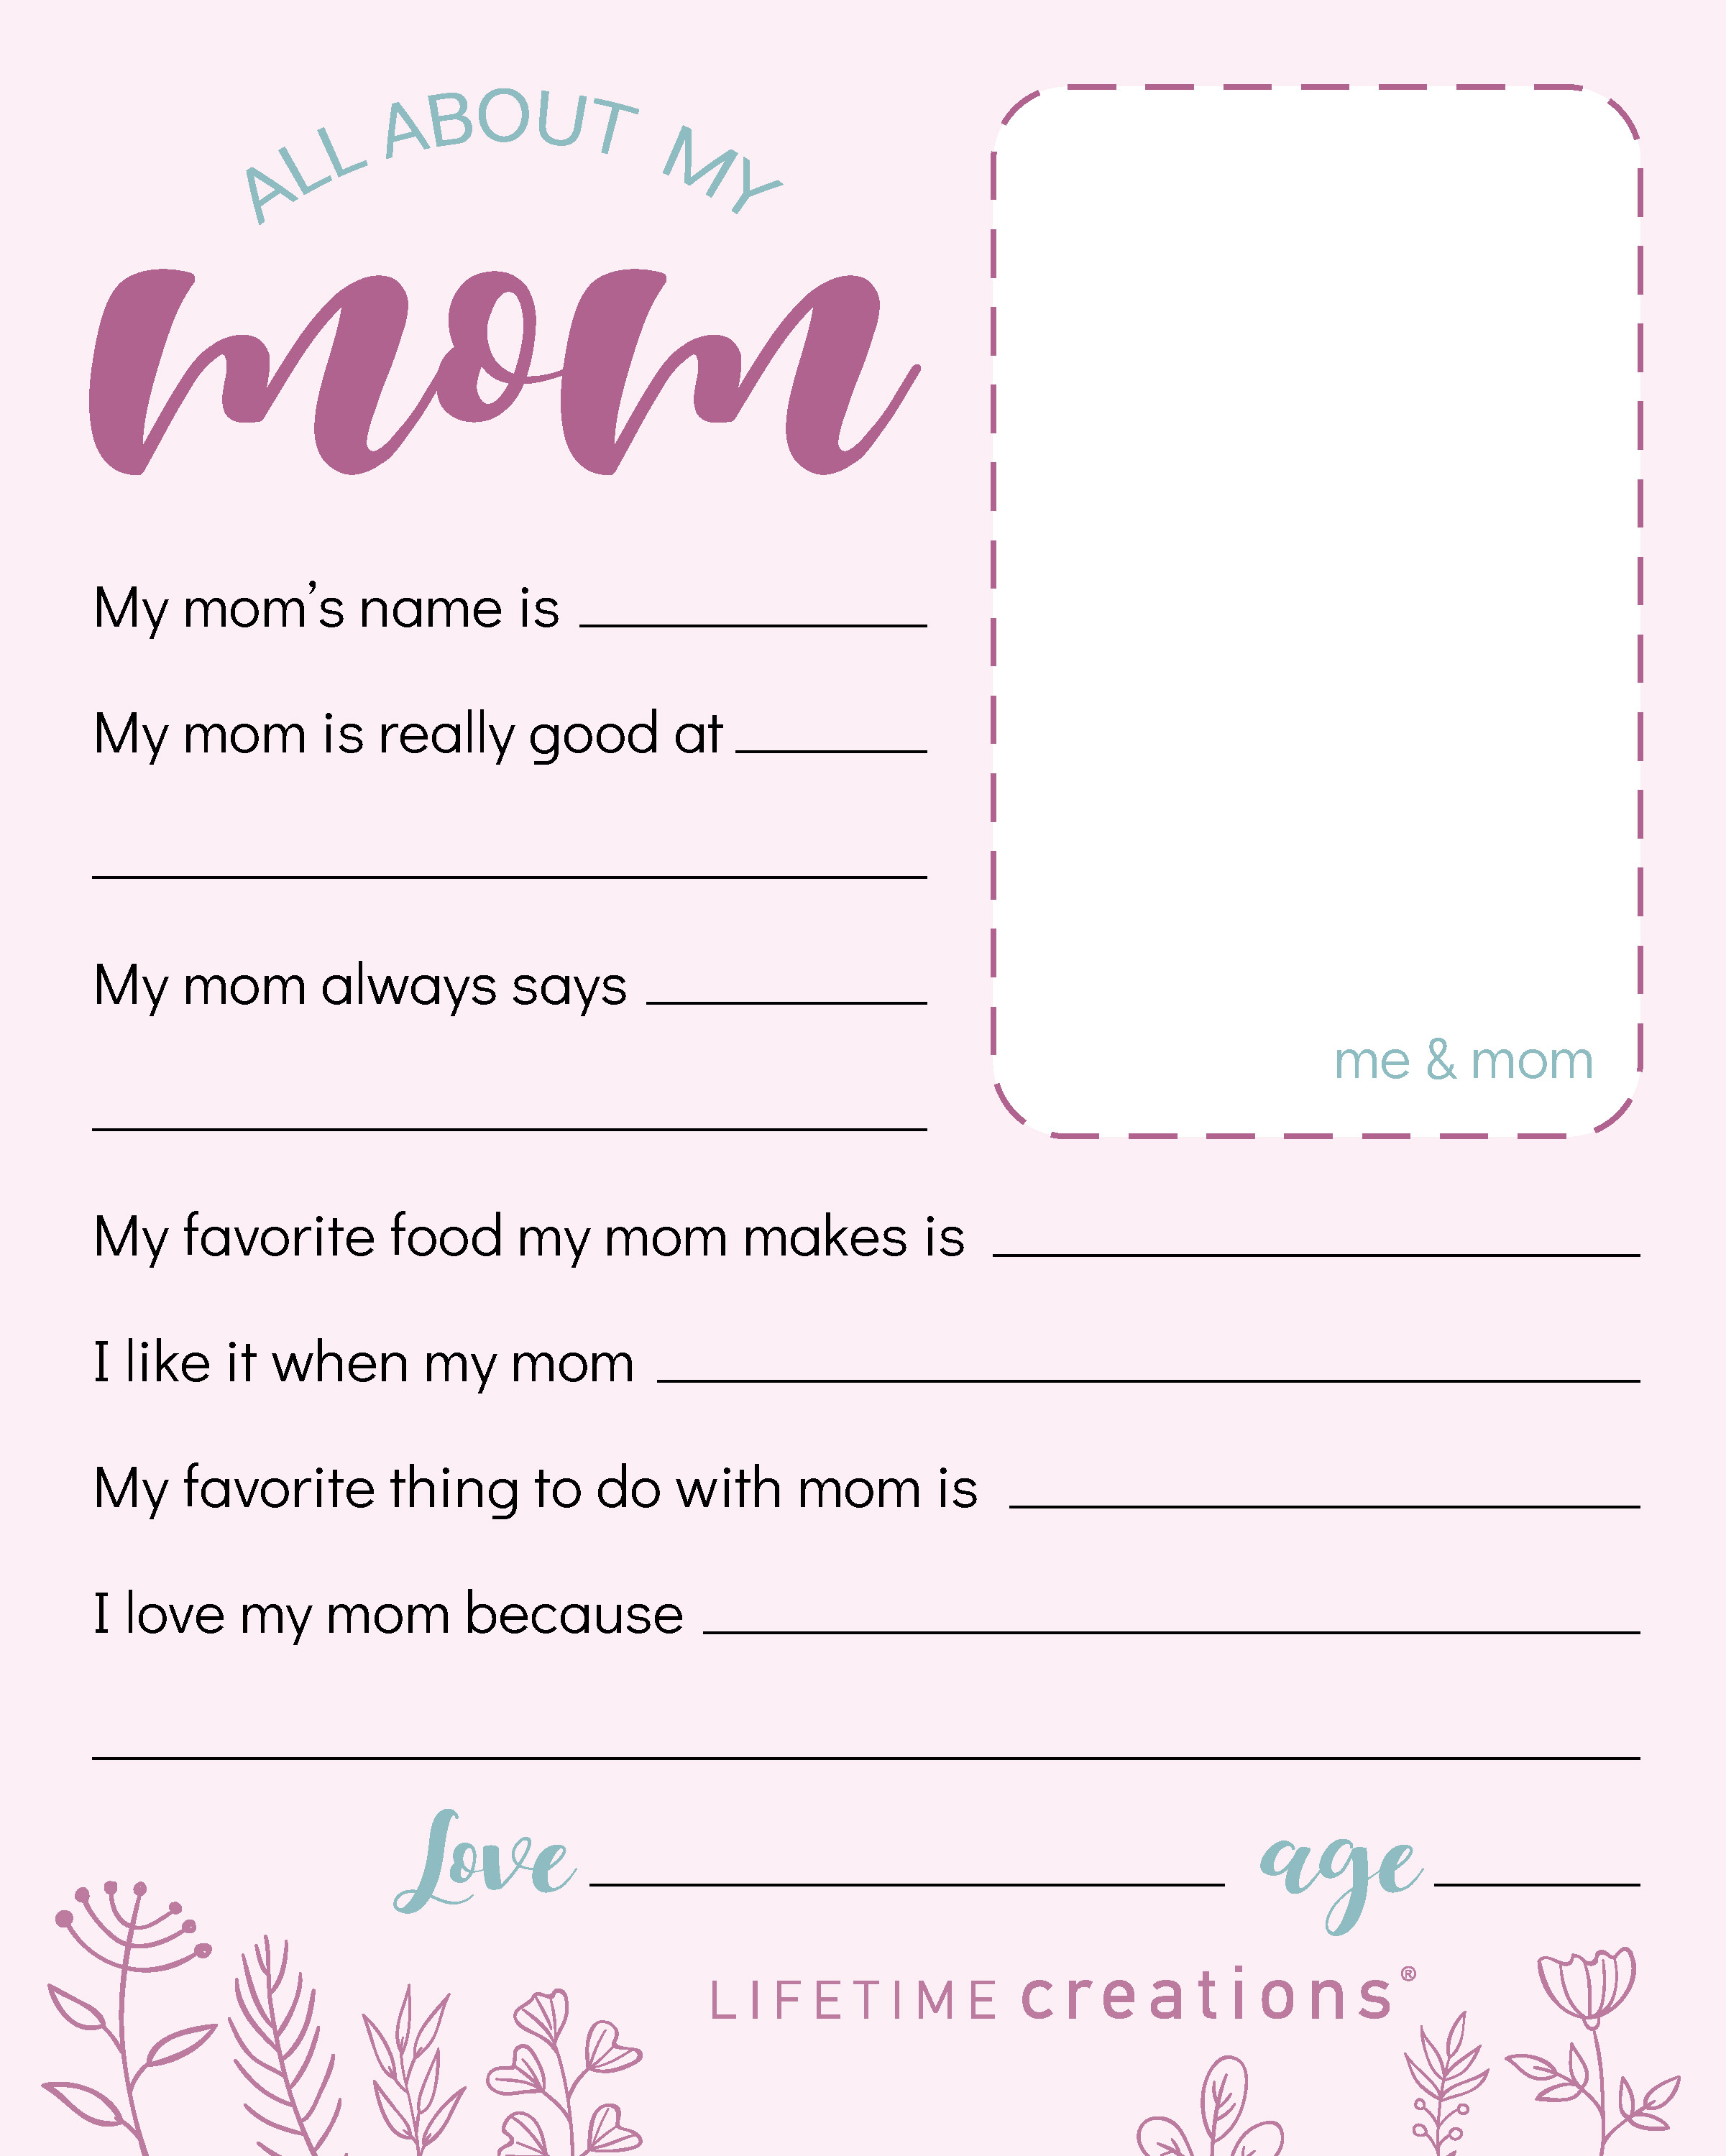 Free Printable Mother s Day Coupons Questionnaire Lifetime Creations